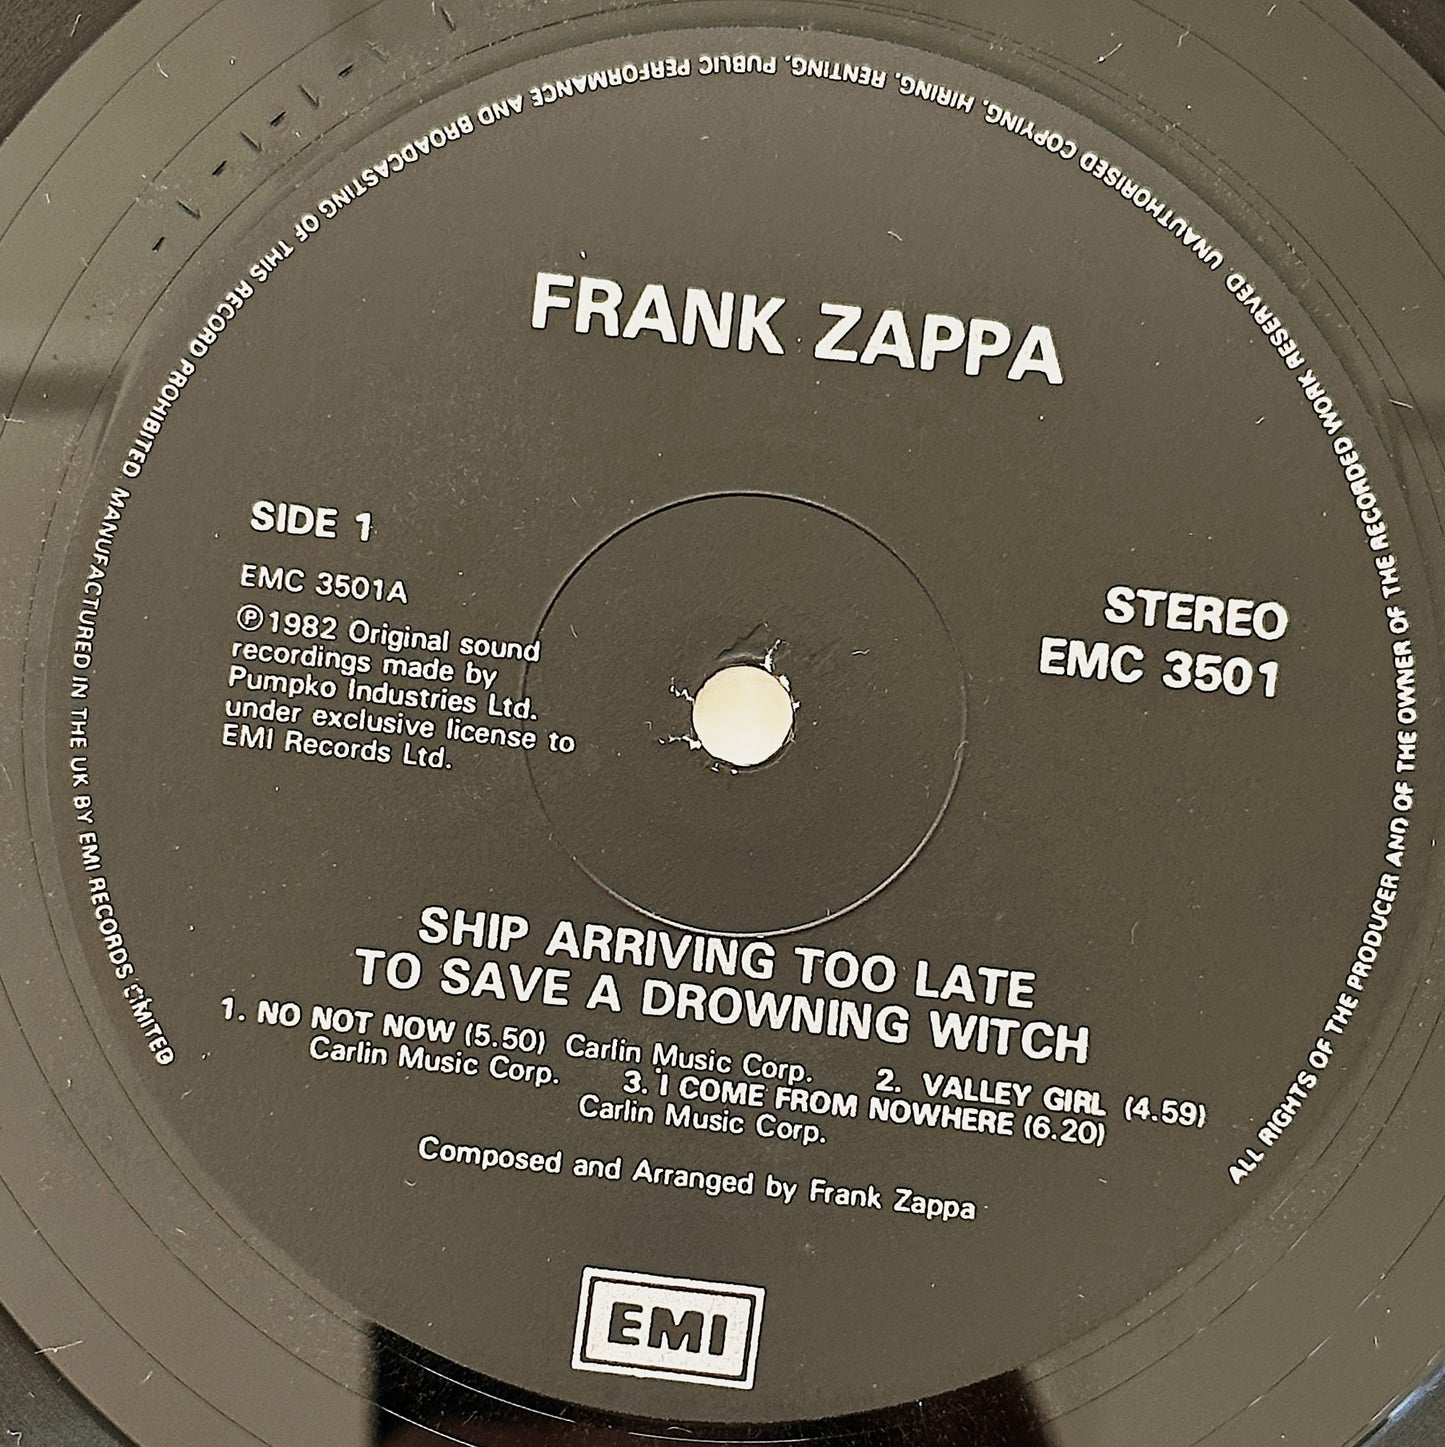 Frank Zappa / Ship Arriving Too Late To Save A Drowning Witch LP